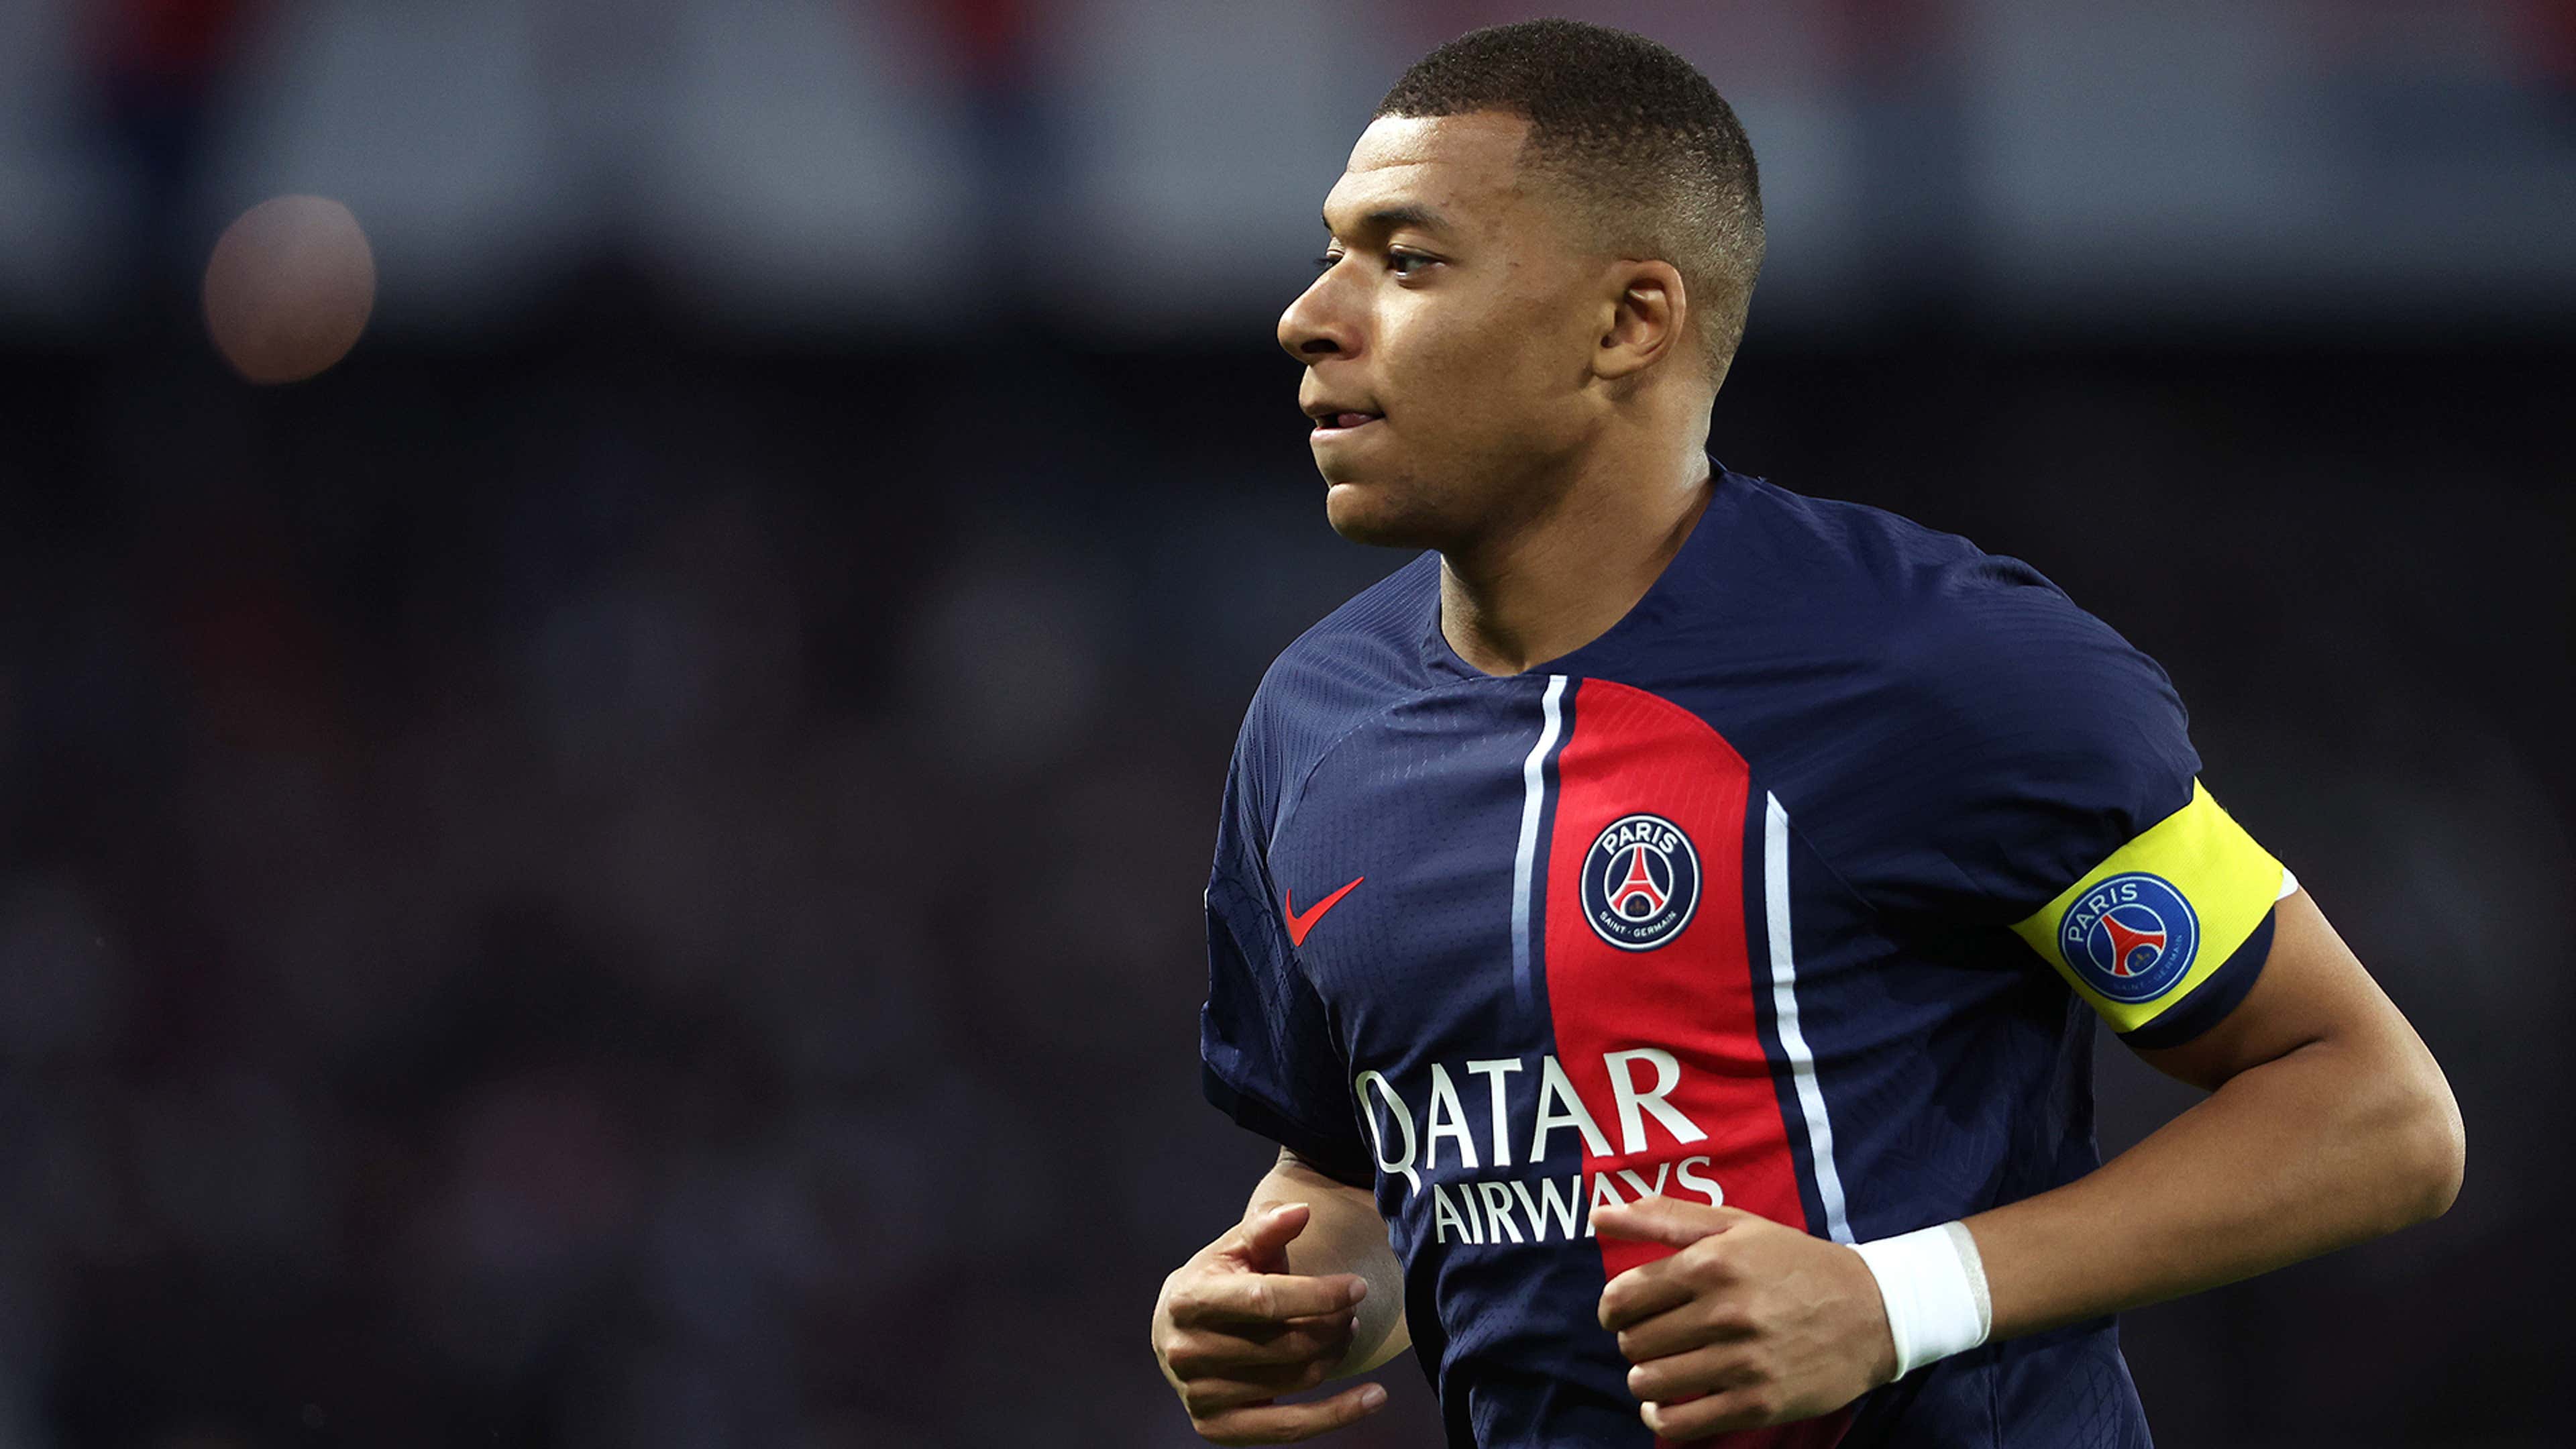 I'm never satisfied' - PSG superstar Kylian Mbappe gives cryptic response  when asked where his future lies amid continued Real Madrid chatter |  Goal.com